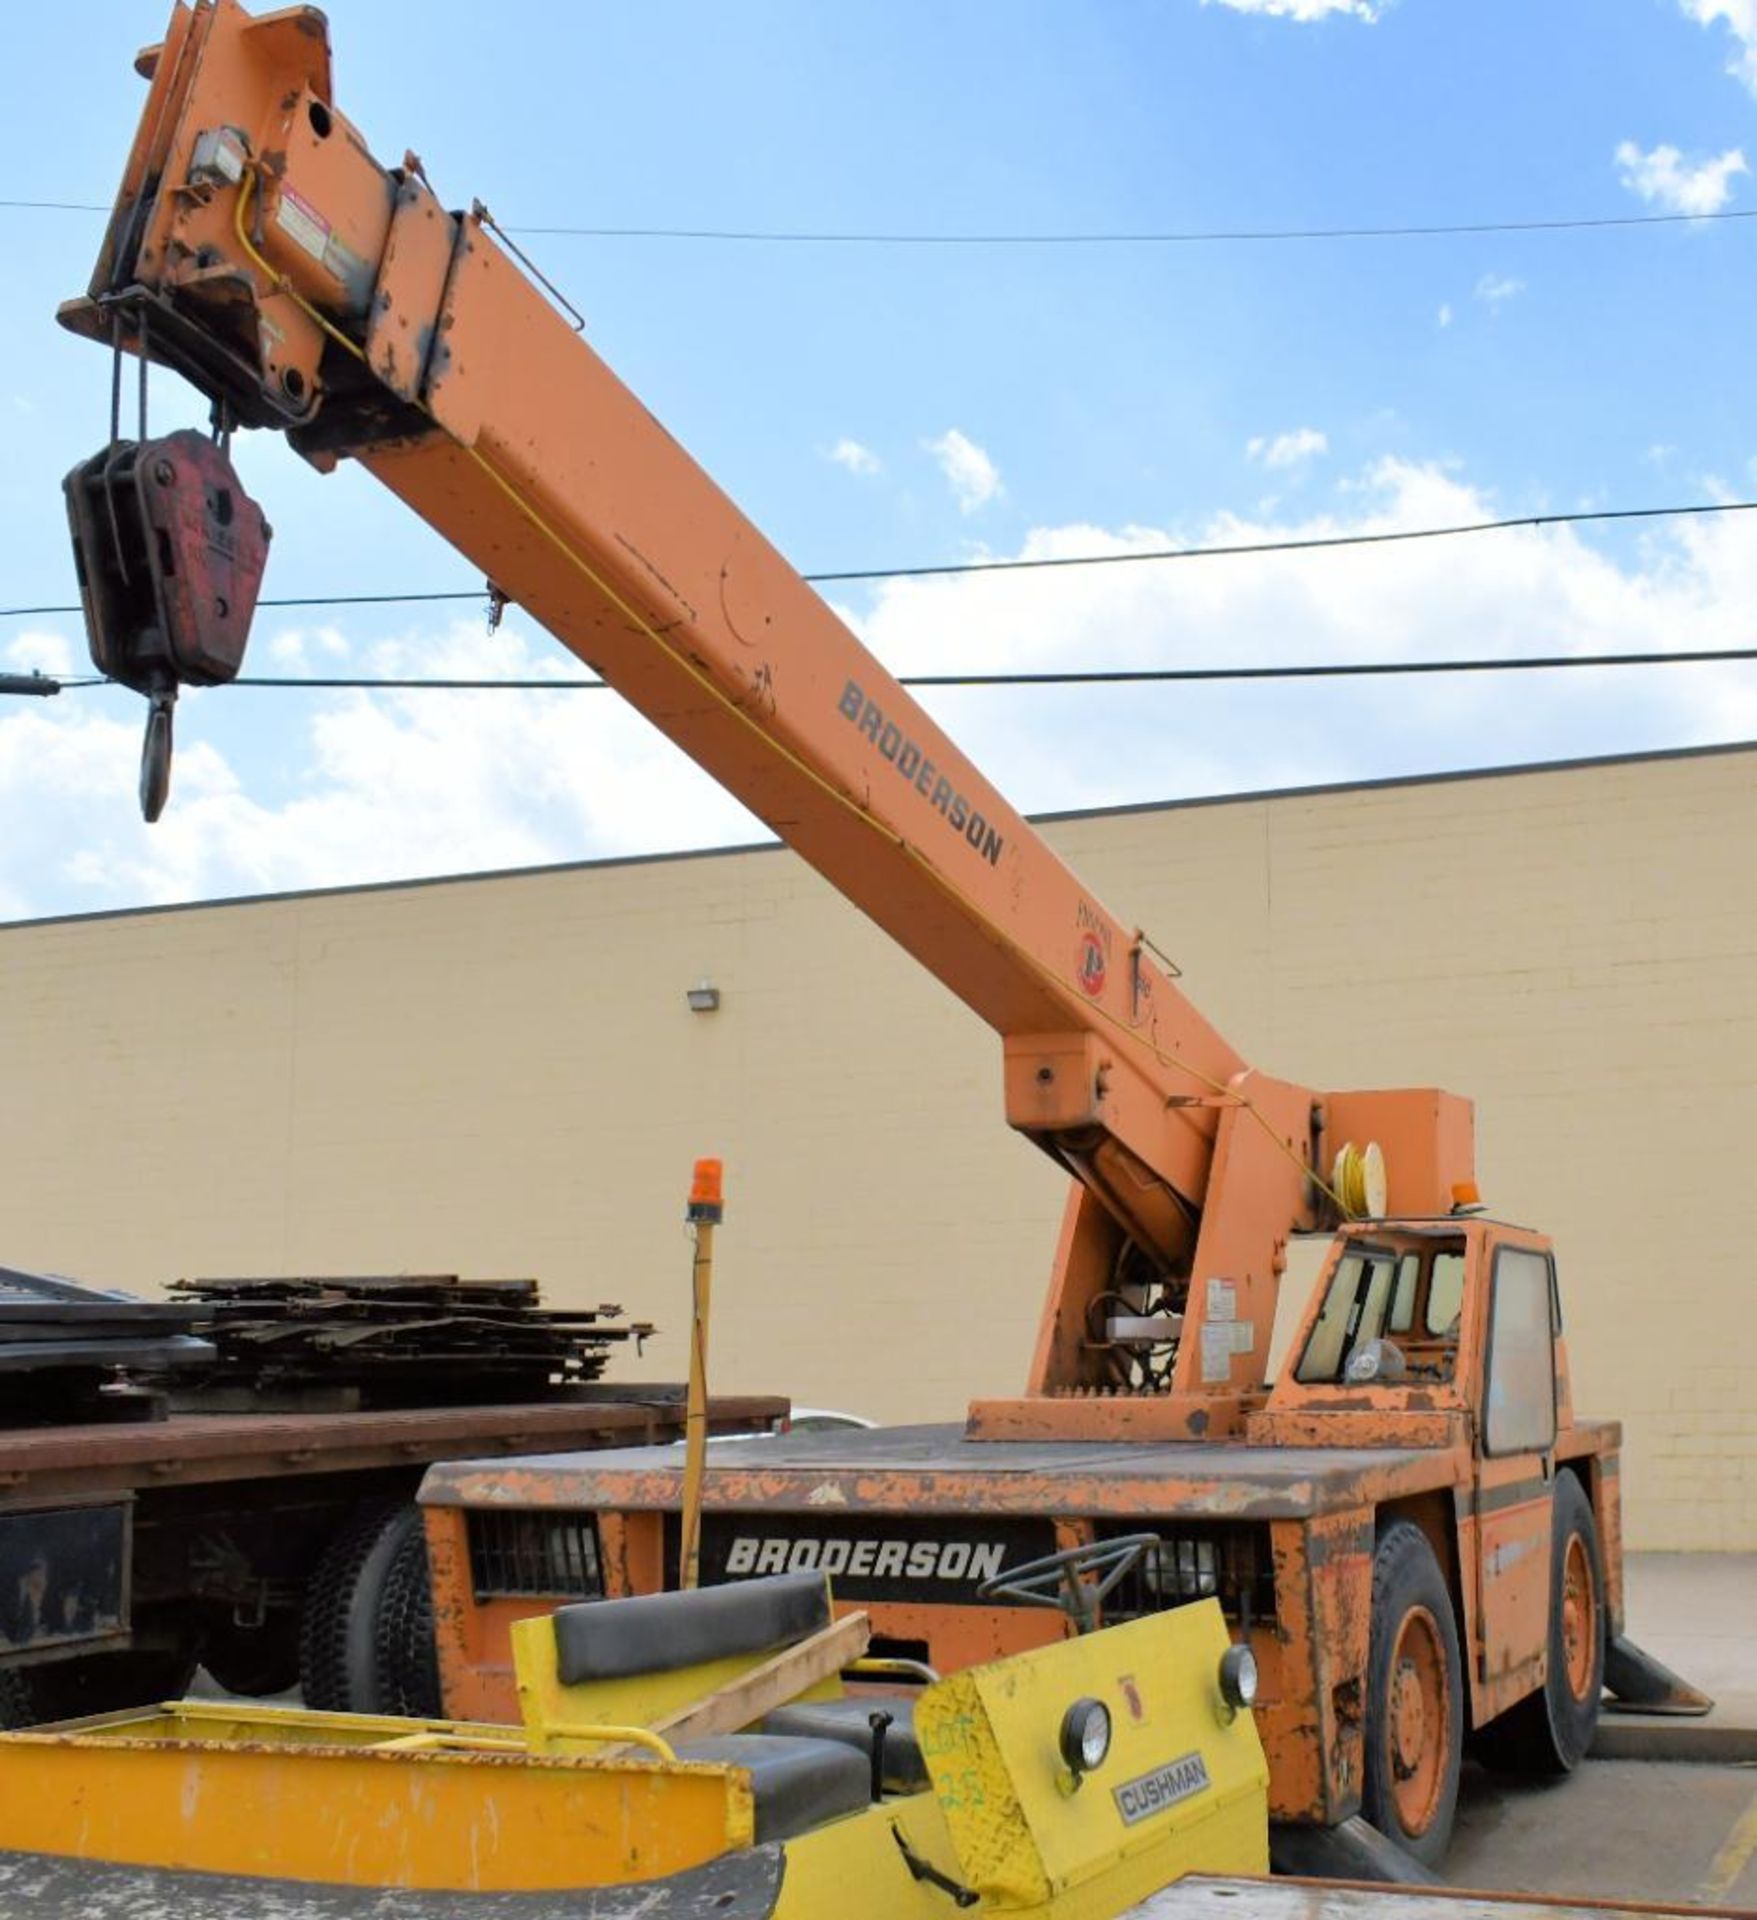 Broderson Model IC2002B, 30,000-Lbs. Capacity Carry Deck Mobile Crane - Image 7 of 7